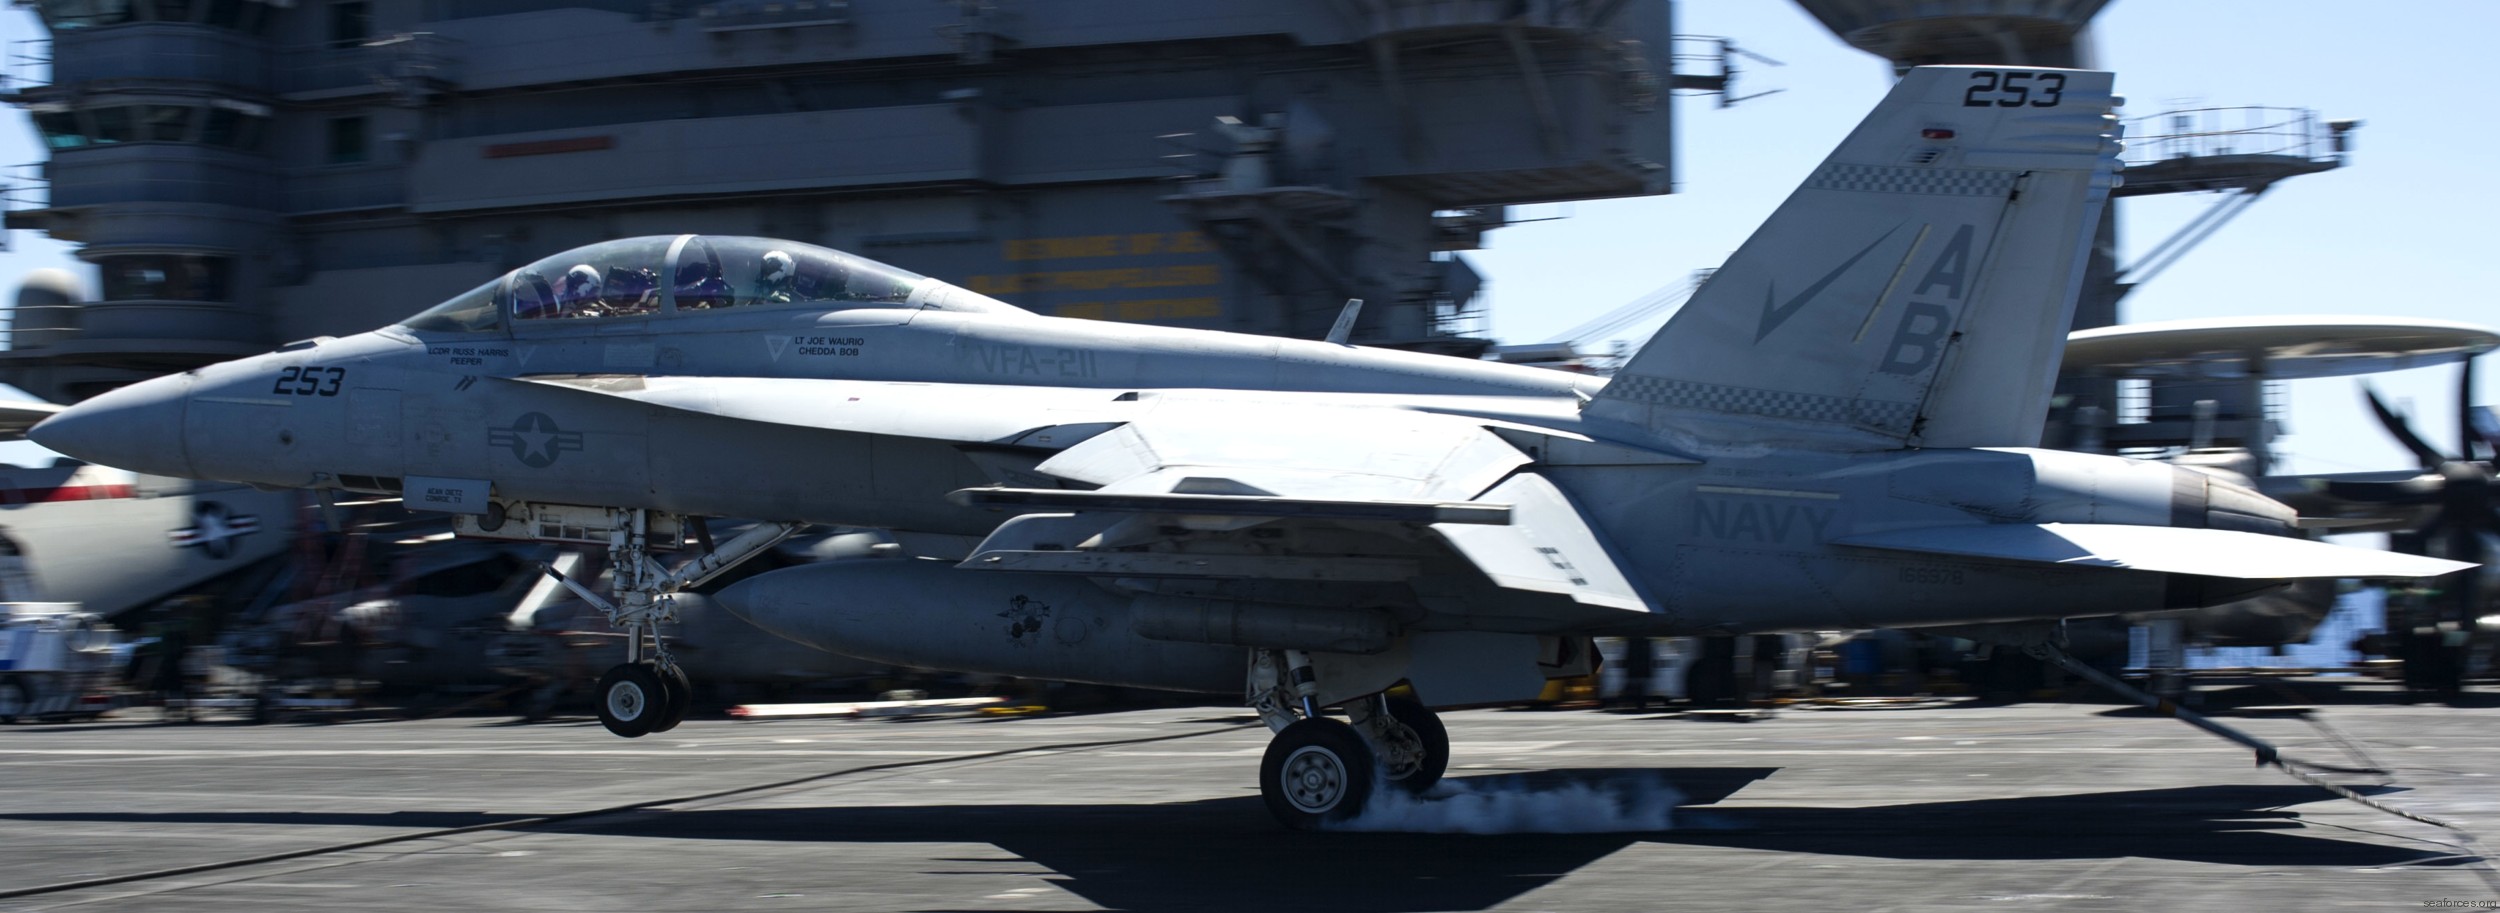 vfa-211 fighting checkmates strike fighter squadron f/a-18f super hornet navy carrier air wing cvw-1 uss harry s. truman cvn-75 87